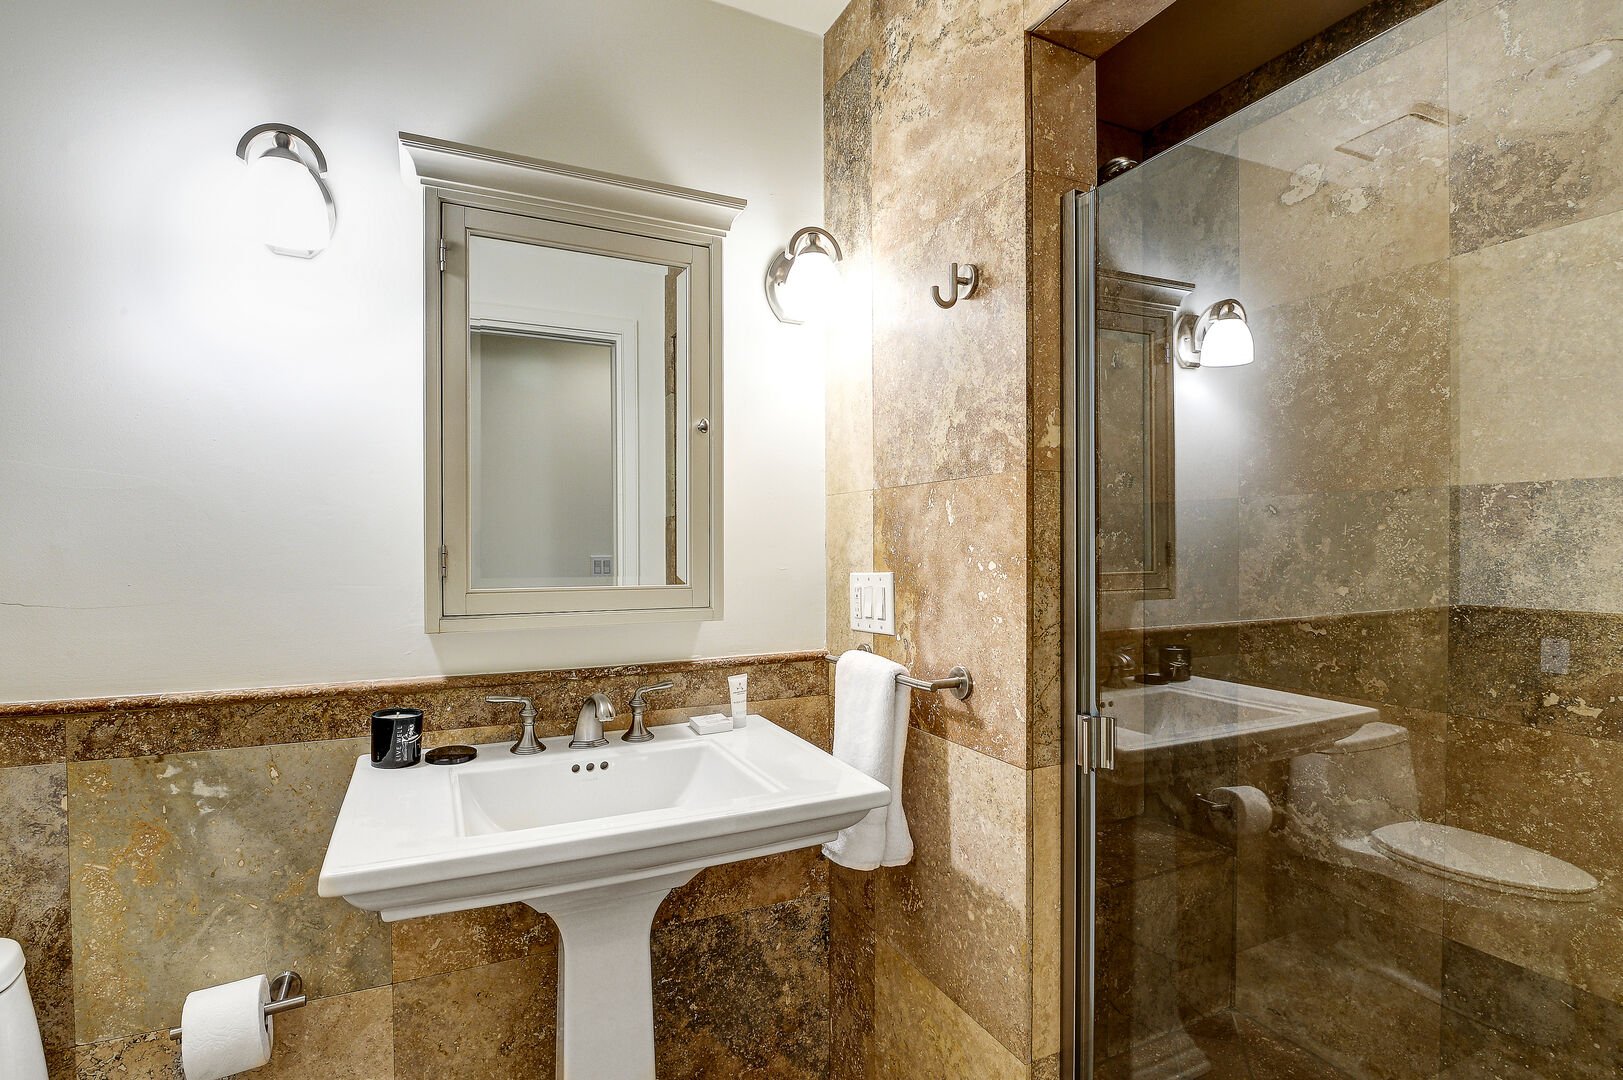 A complete bathroom situated adjacent to Bedroom 4.